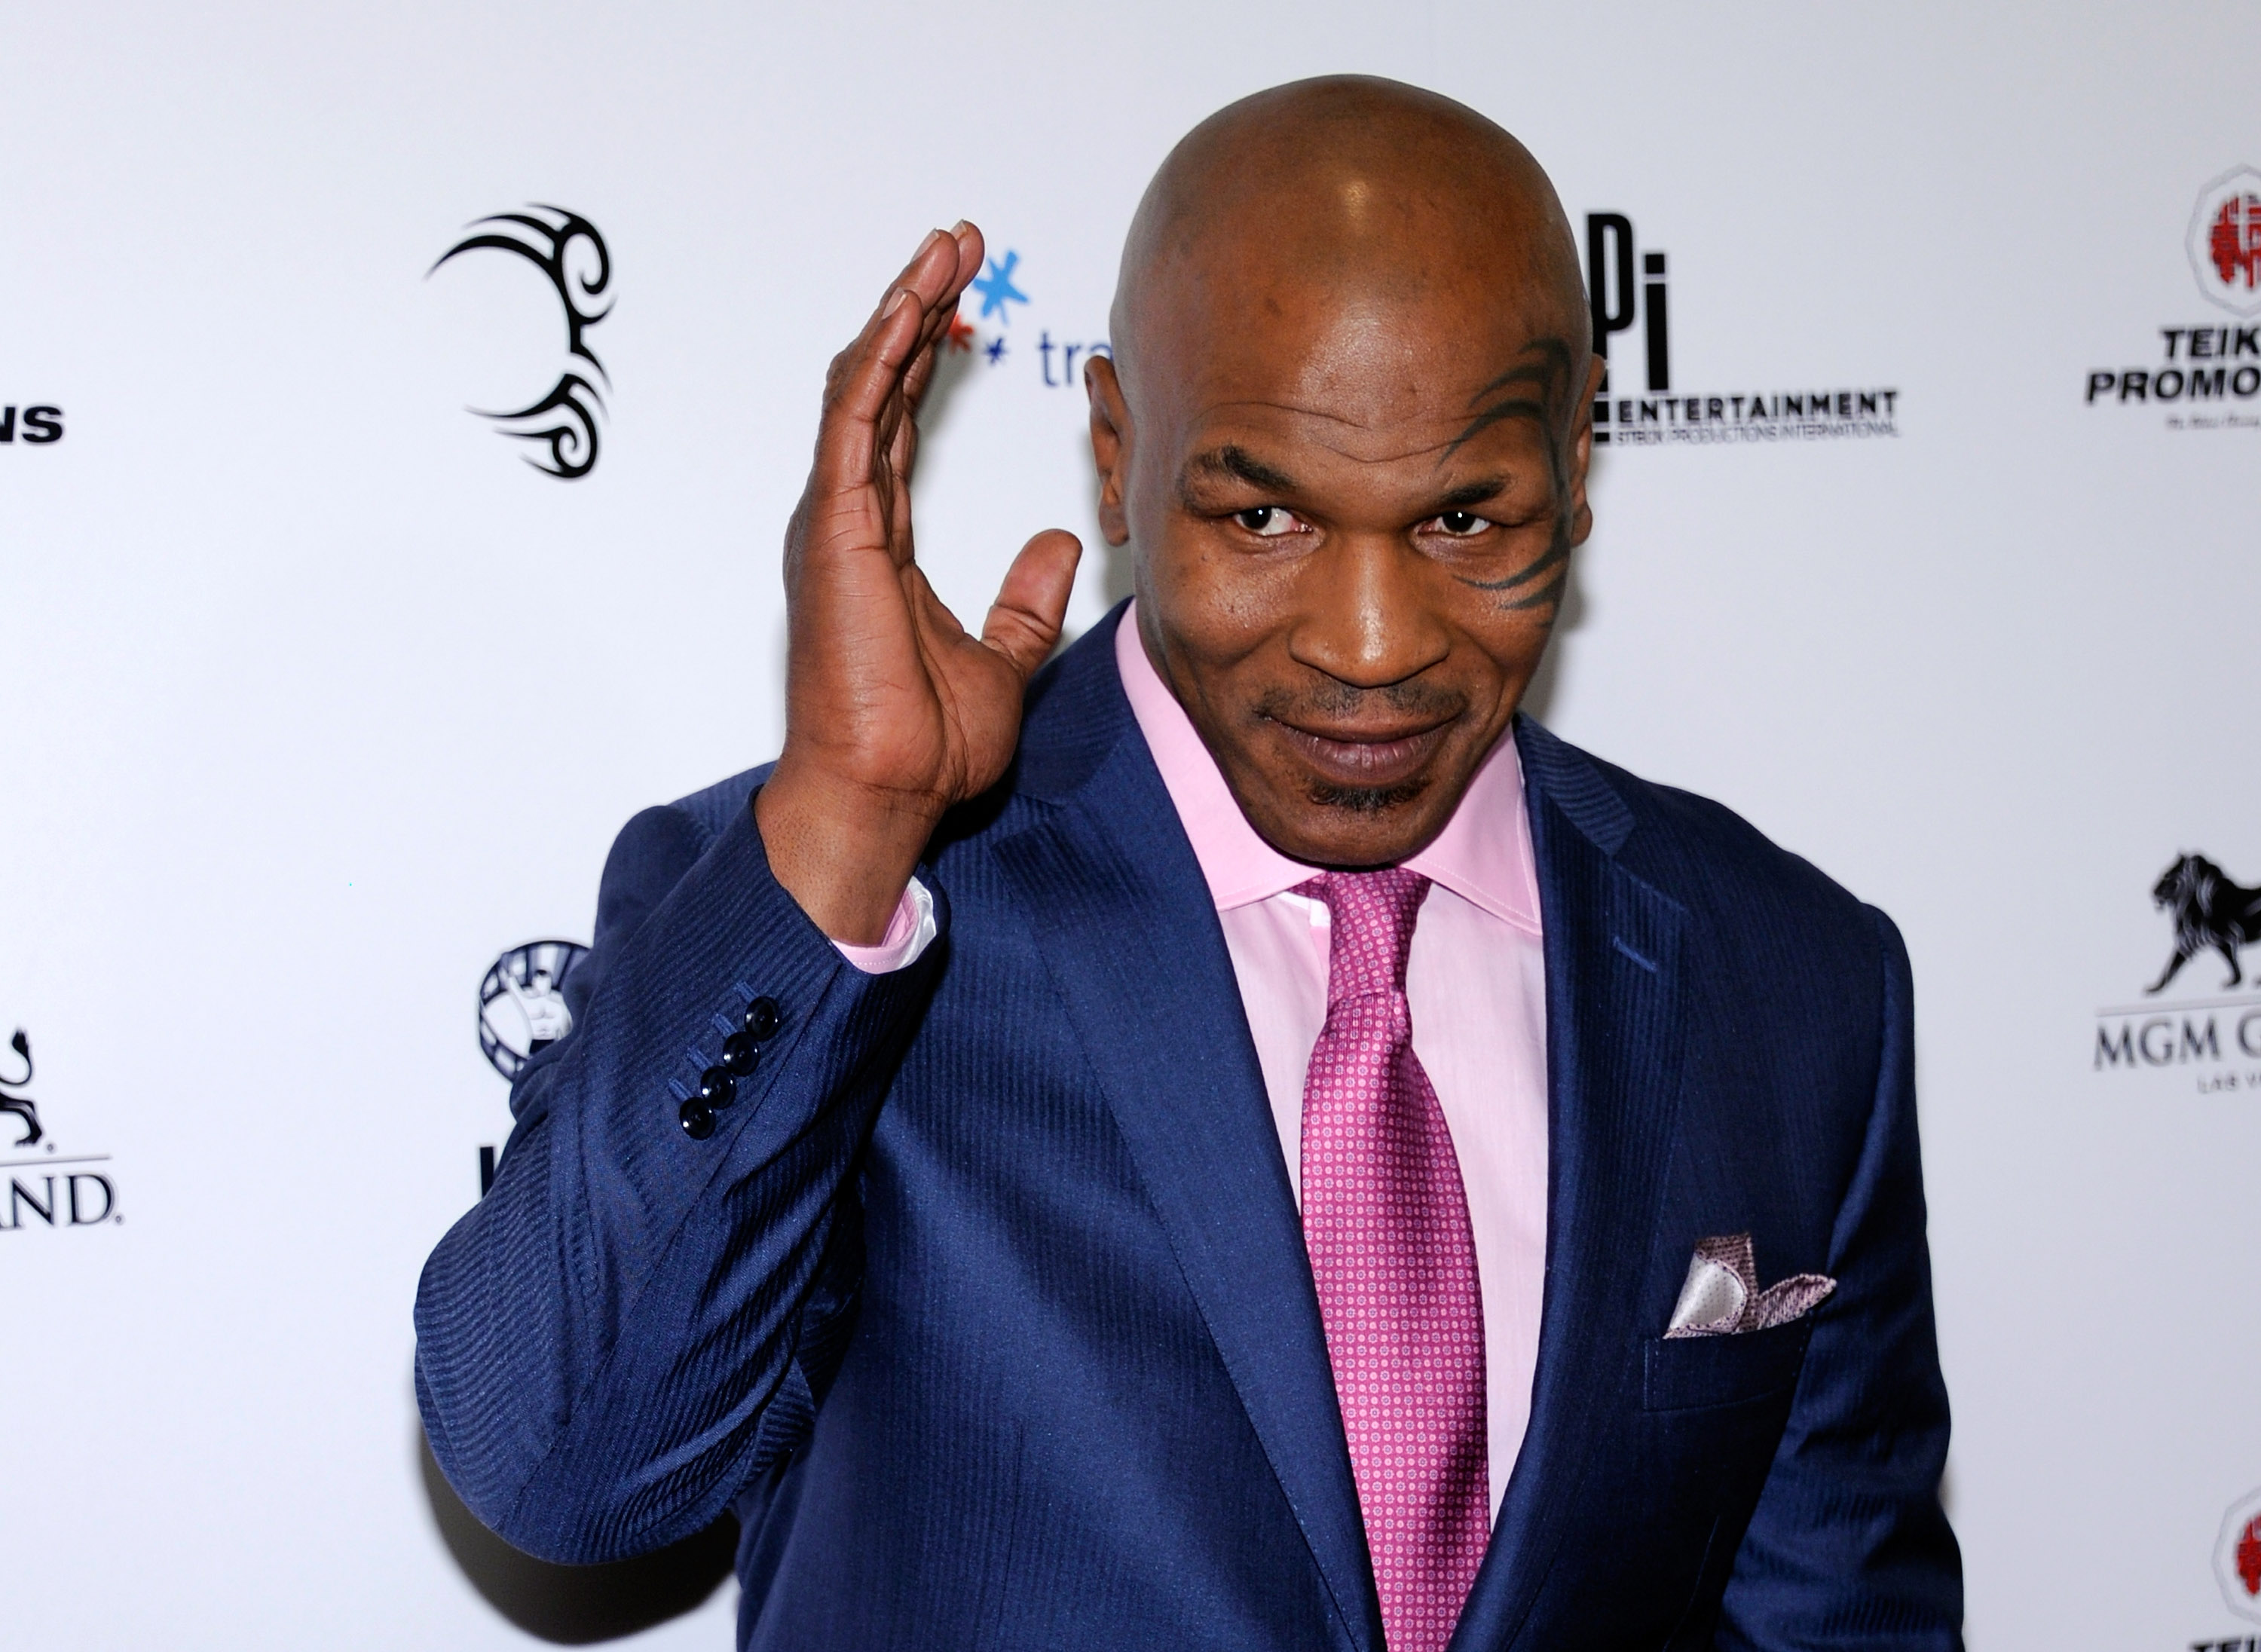 Mike Tyson even intimidated the Detroit Pistons' Bad Boys.